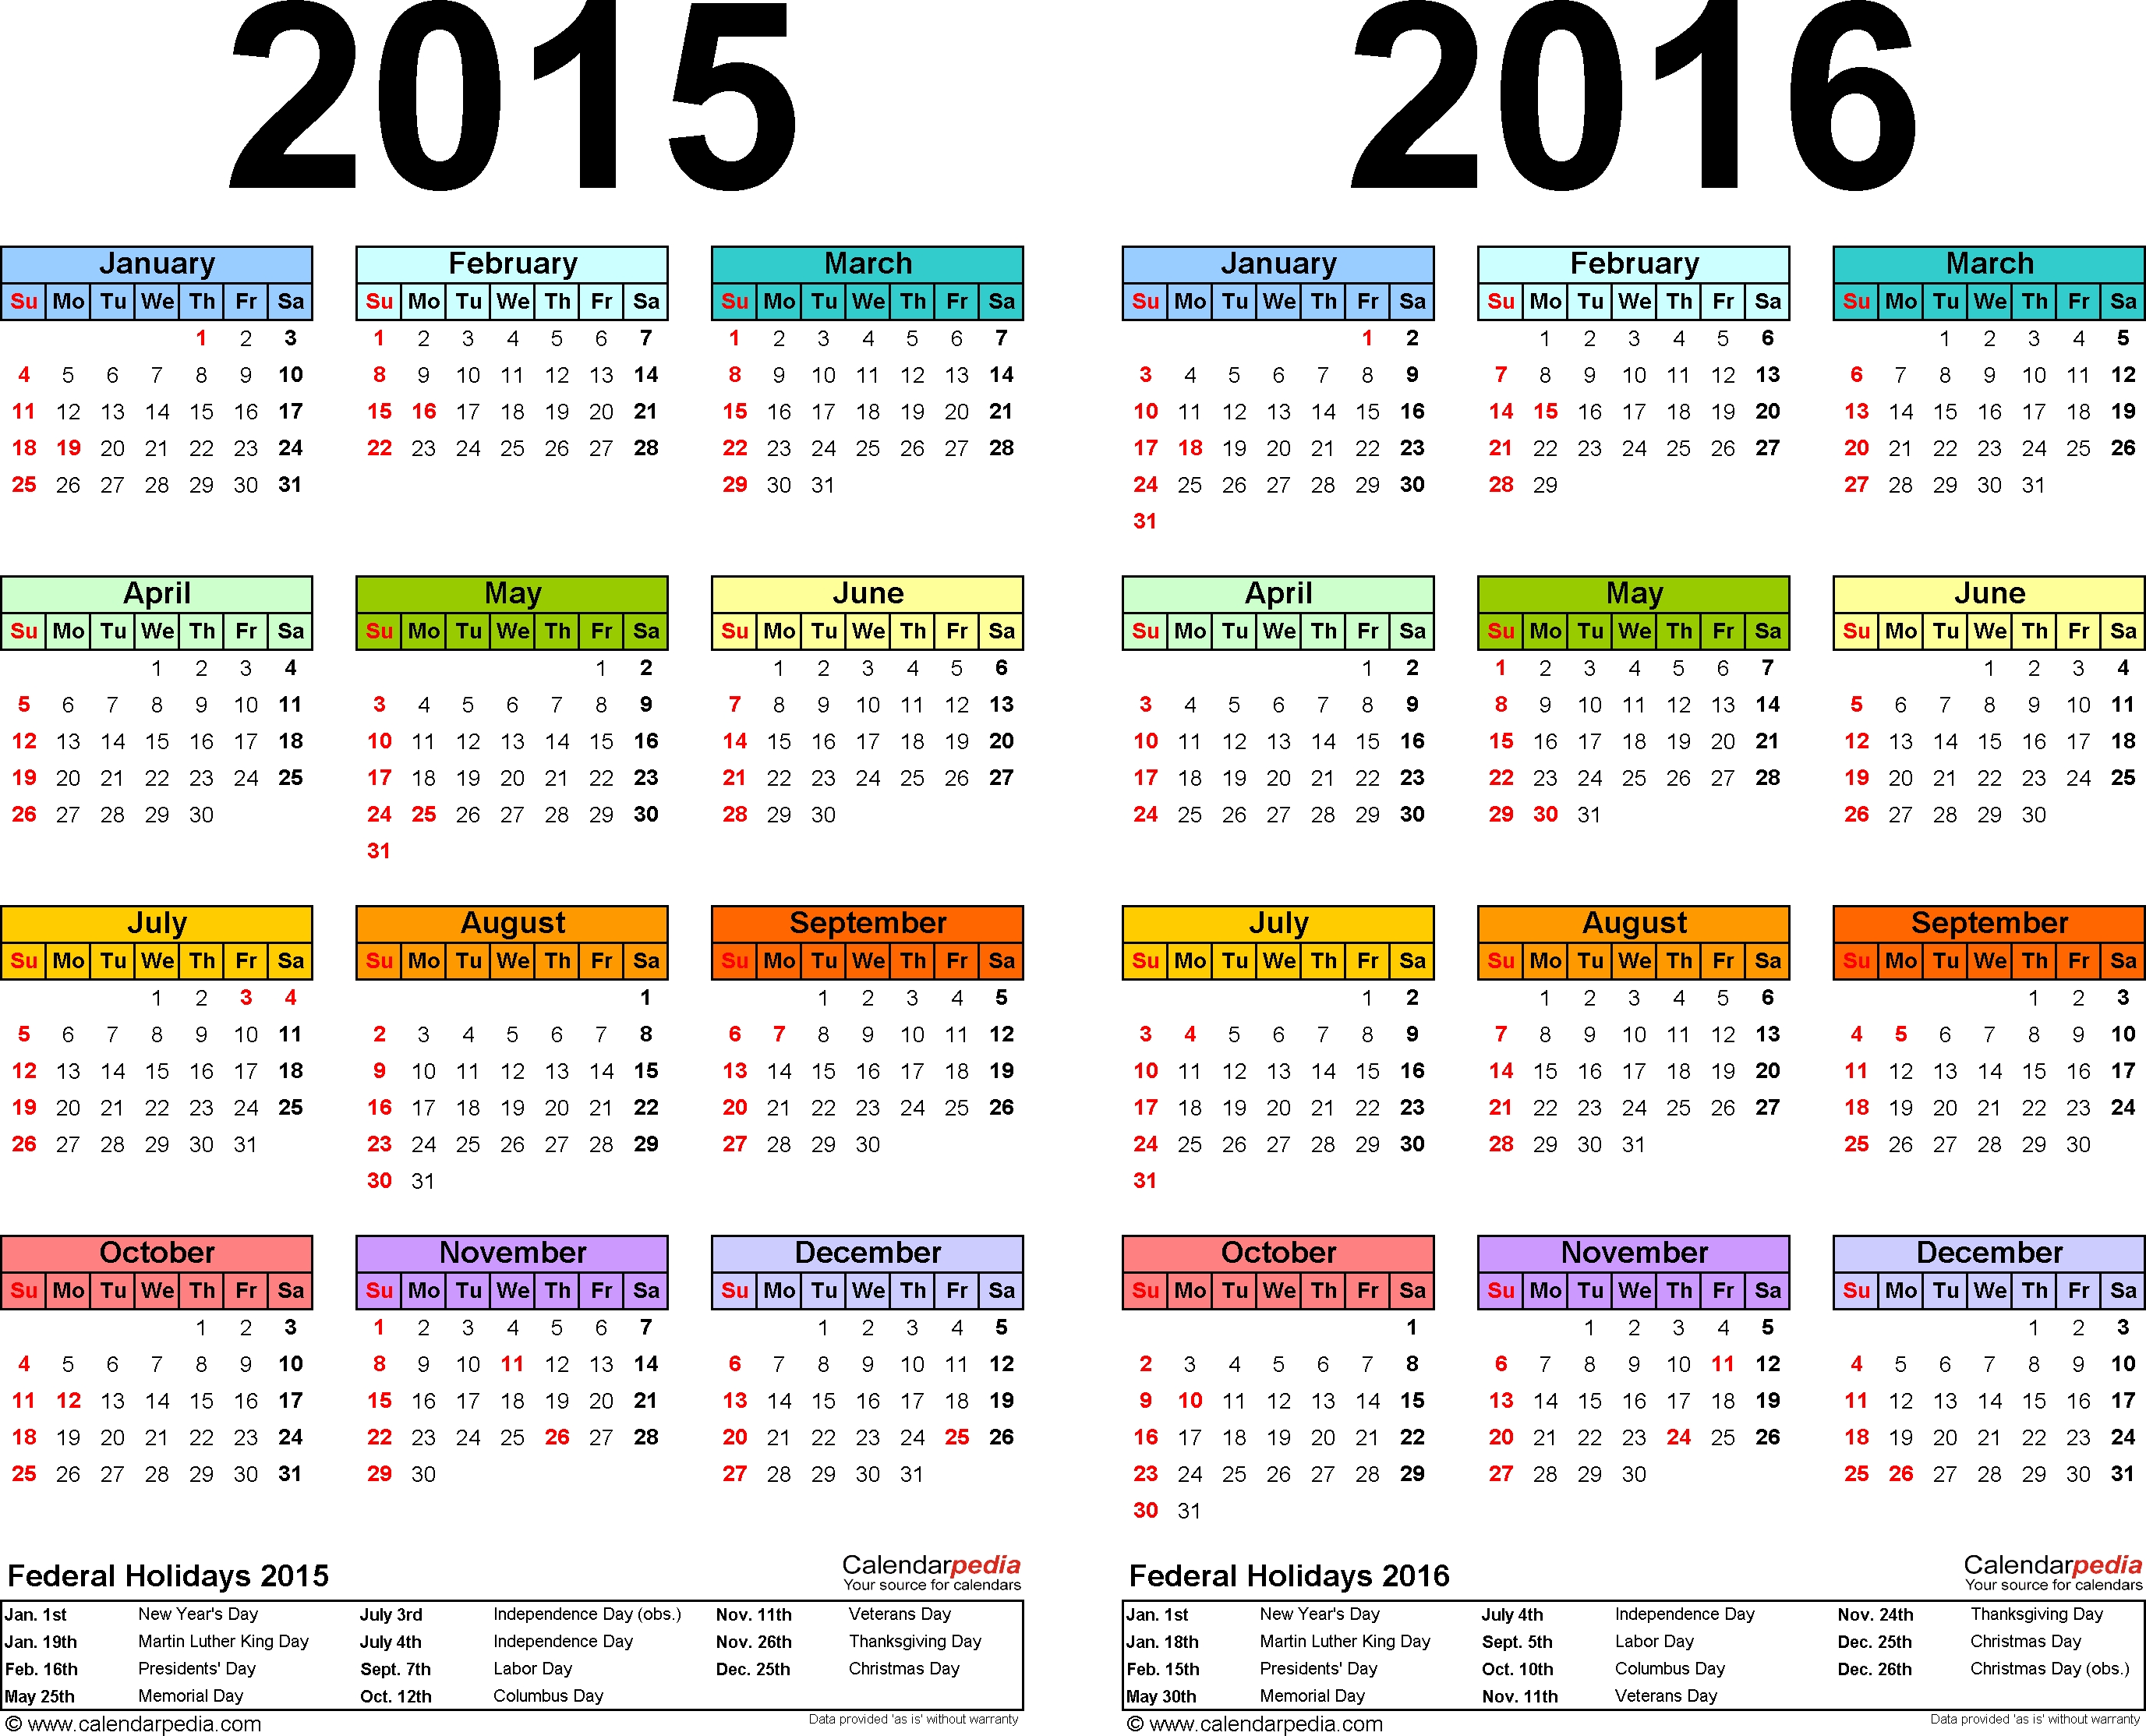 Template 1: Pdf Template For Two Year Calendar 2015/2016